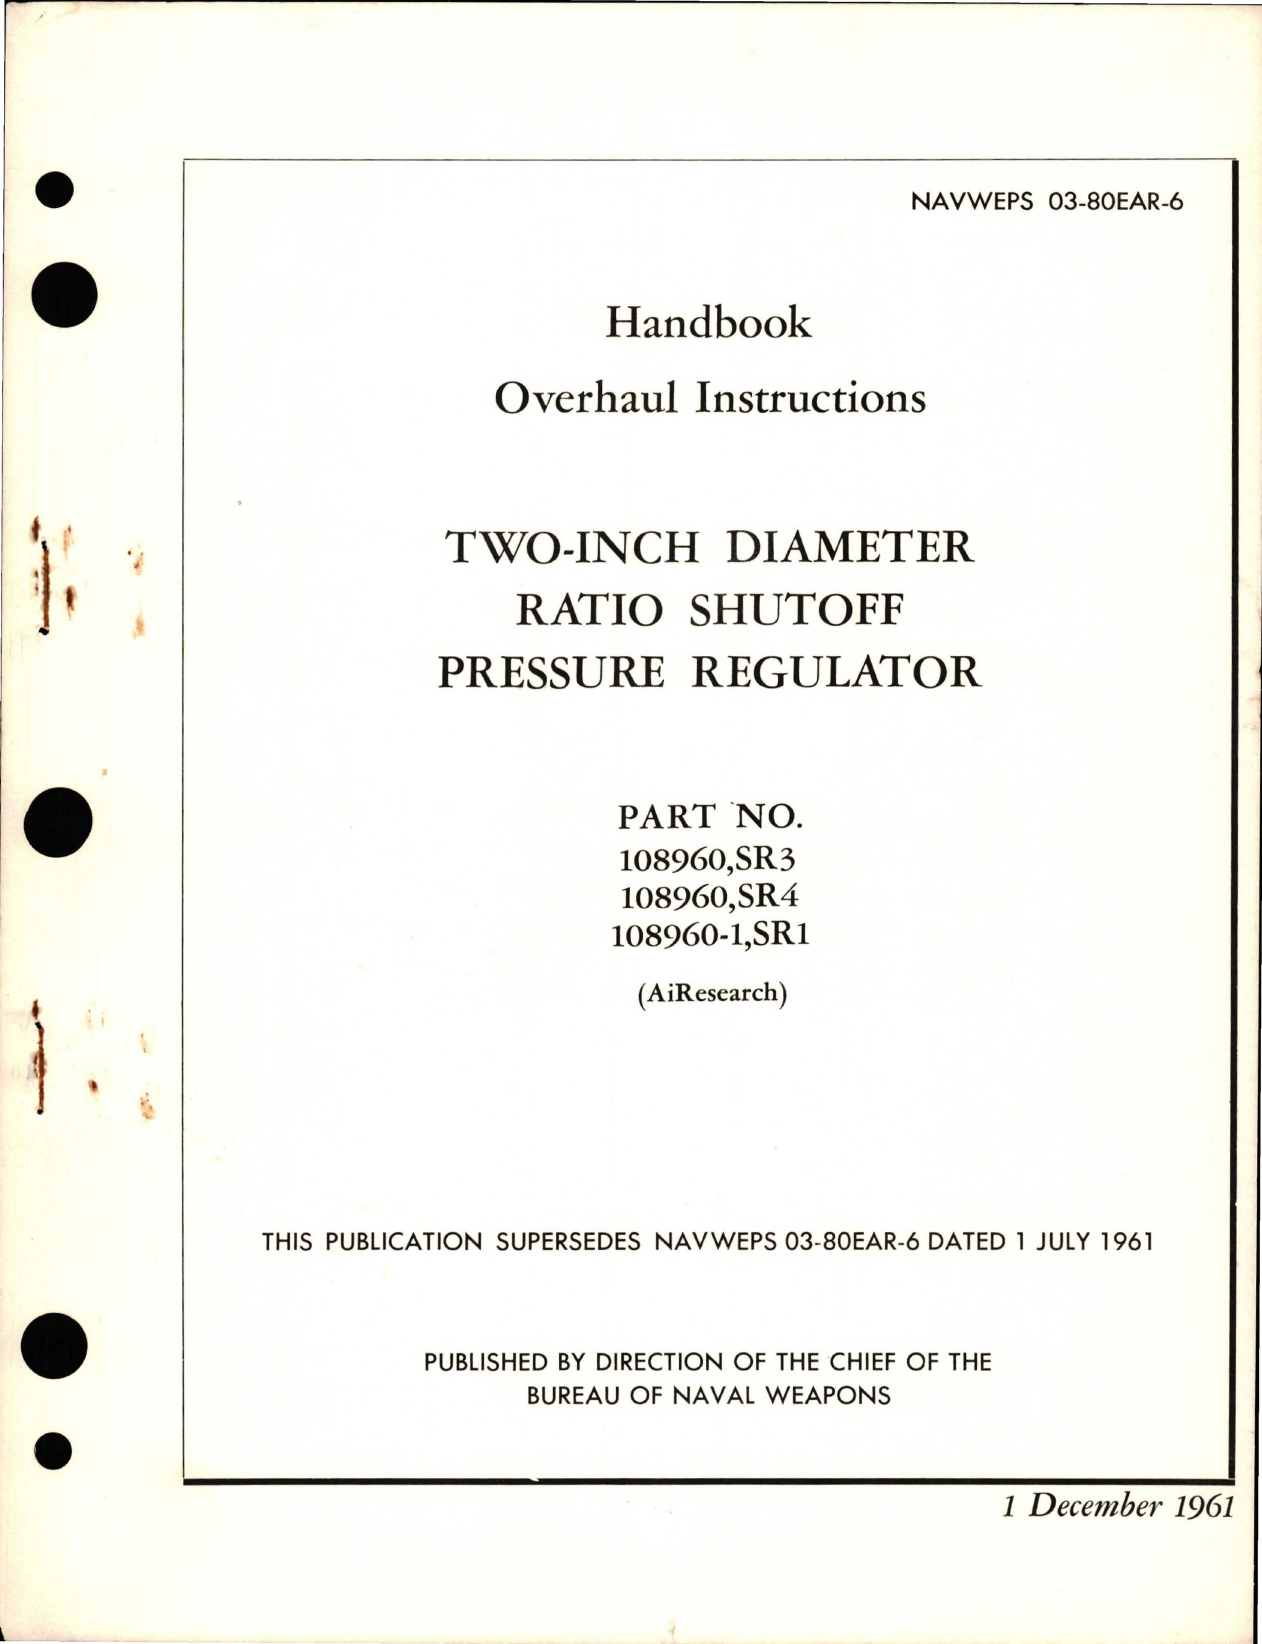 Sample page 1 from AirCorps Library document: Overhaul Instructions for Two-Inch Diameter Ratio Shutoff Pressure Regulator - Parts 108960,SR3, 108960,SR4, and 108960-1,SR1